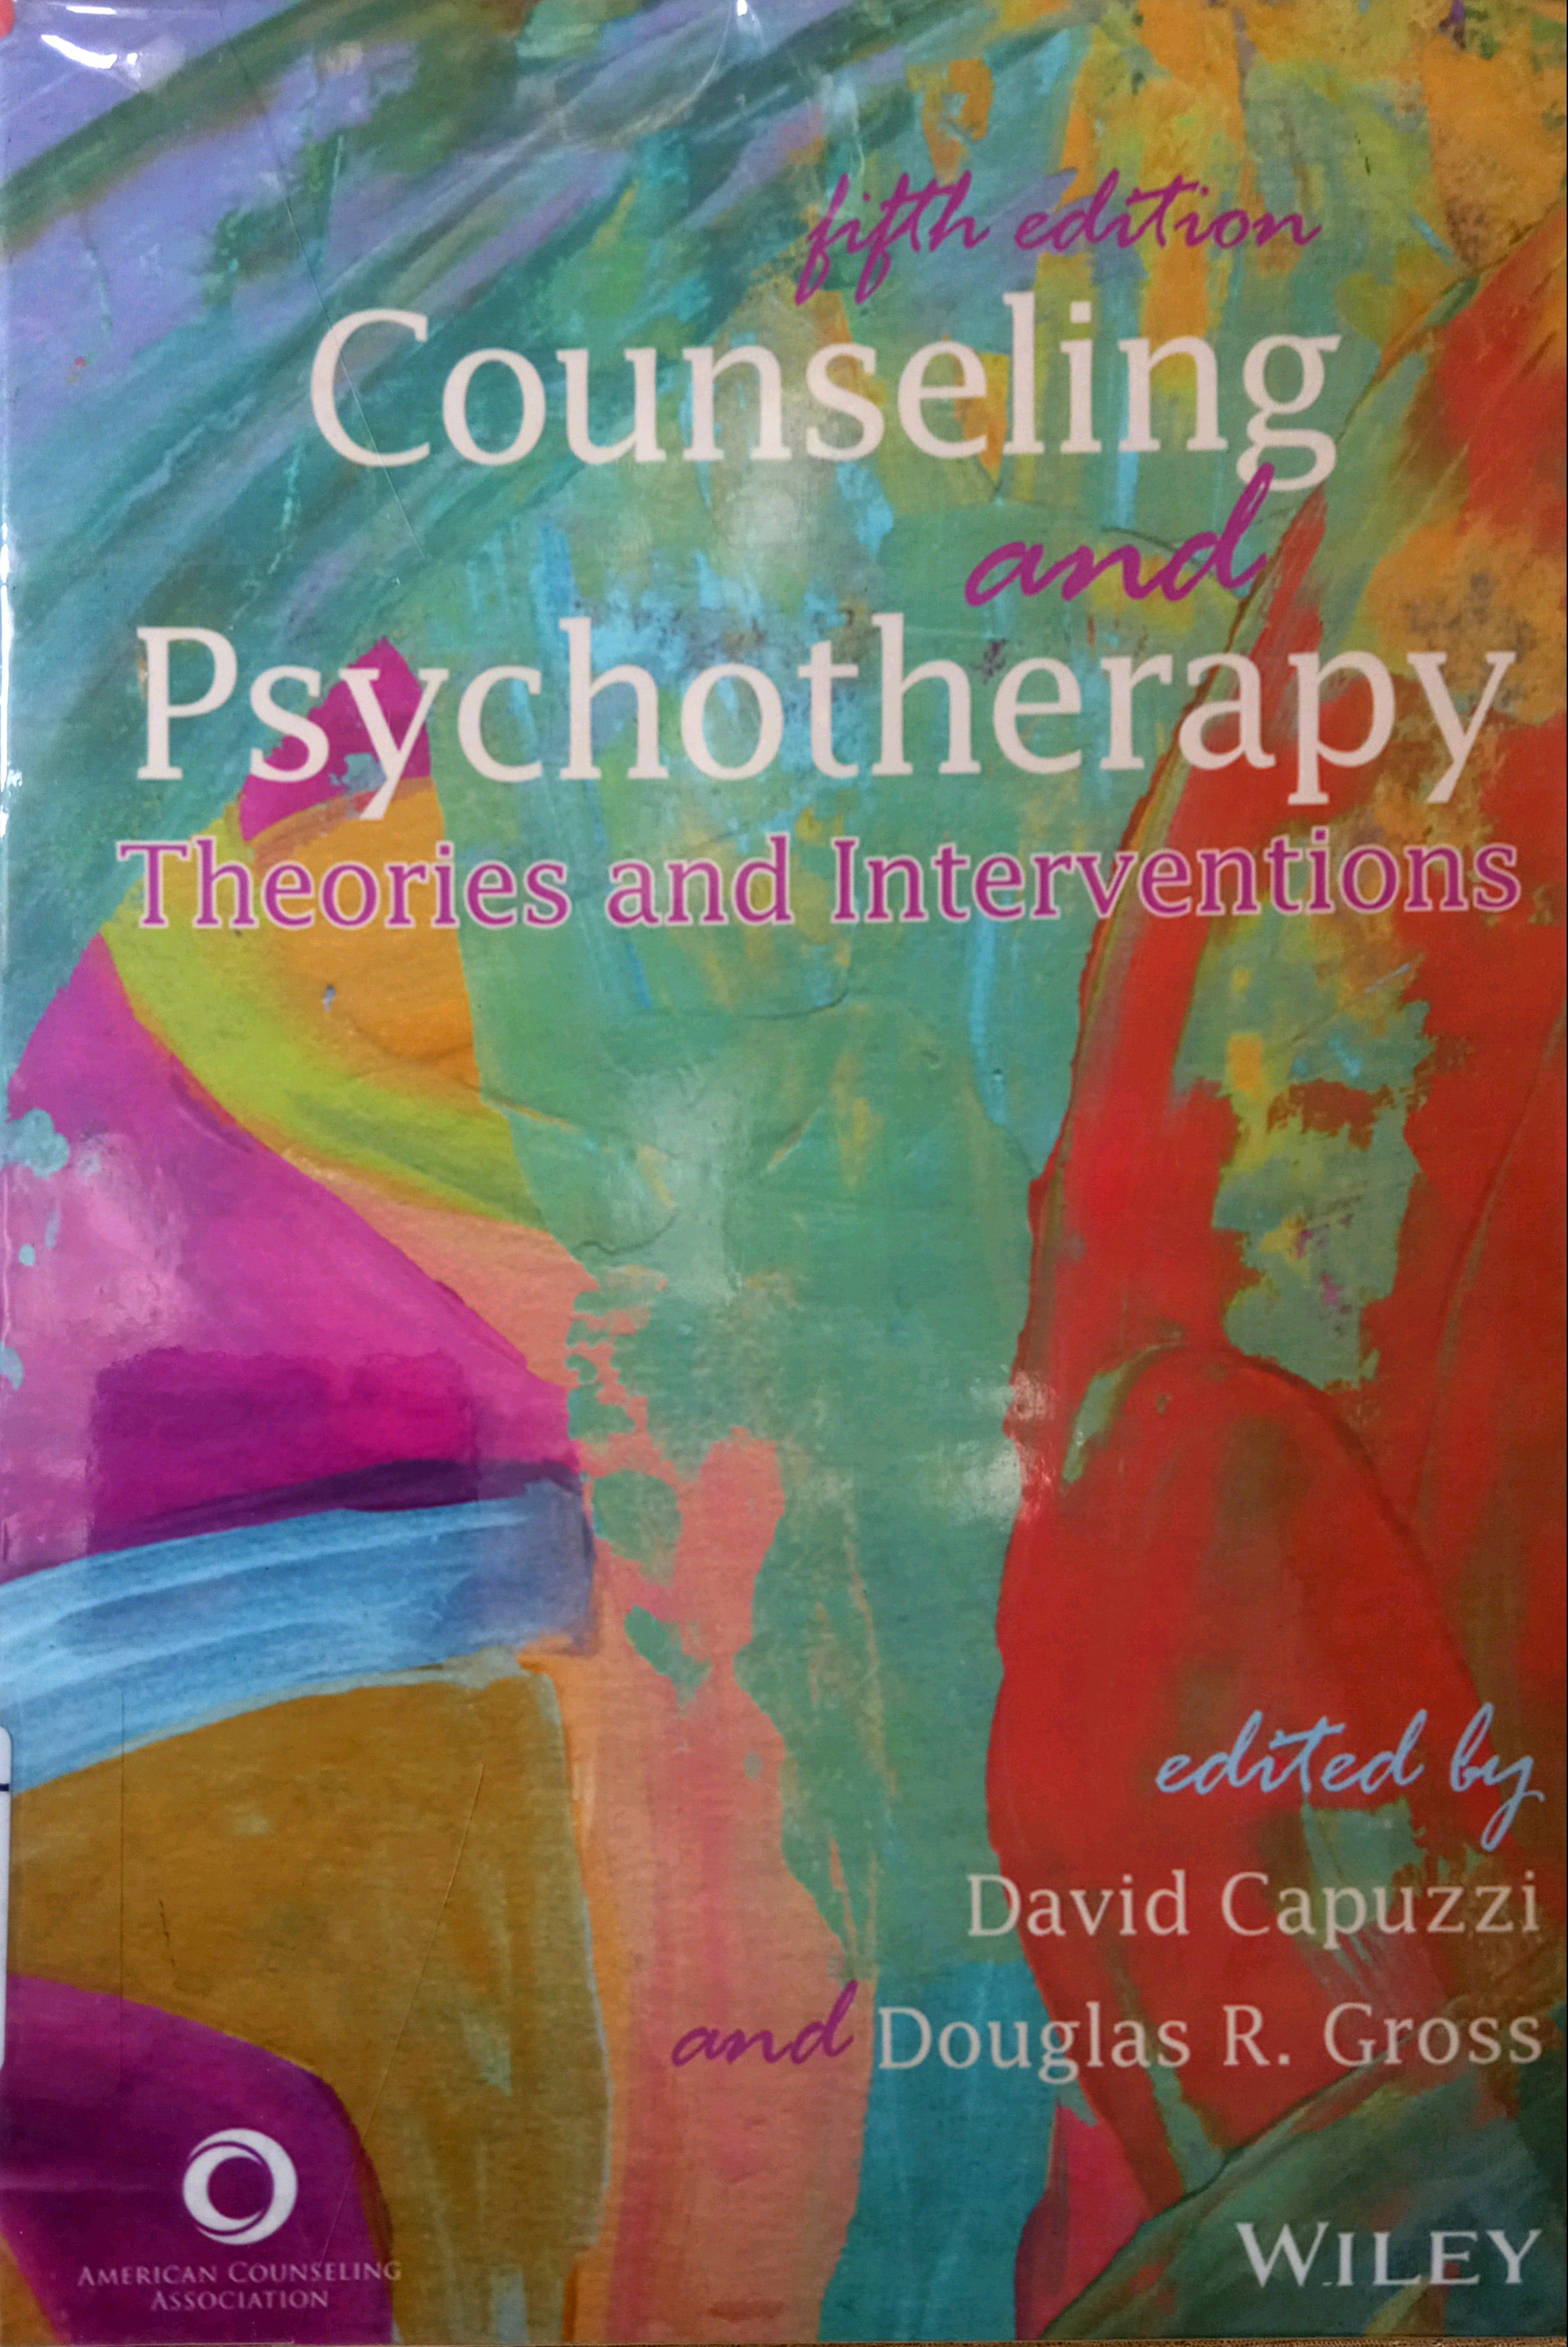 COUNSELING AND PSYCHOTHERAPY: THEORIES AND INTERVENTIONS